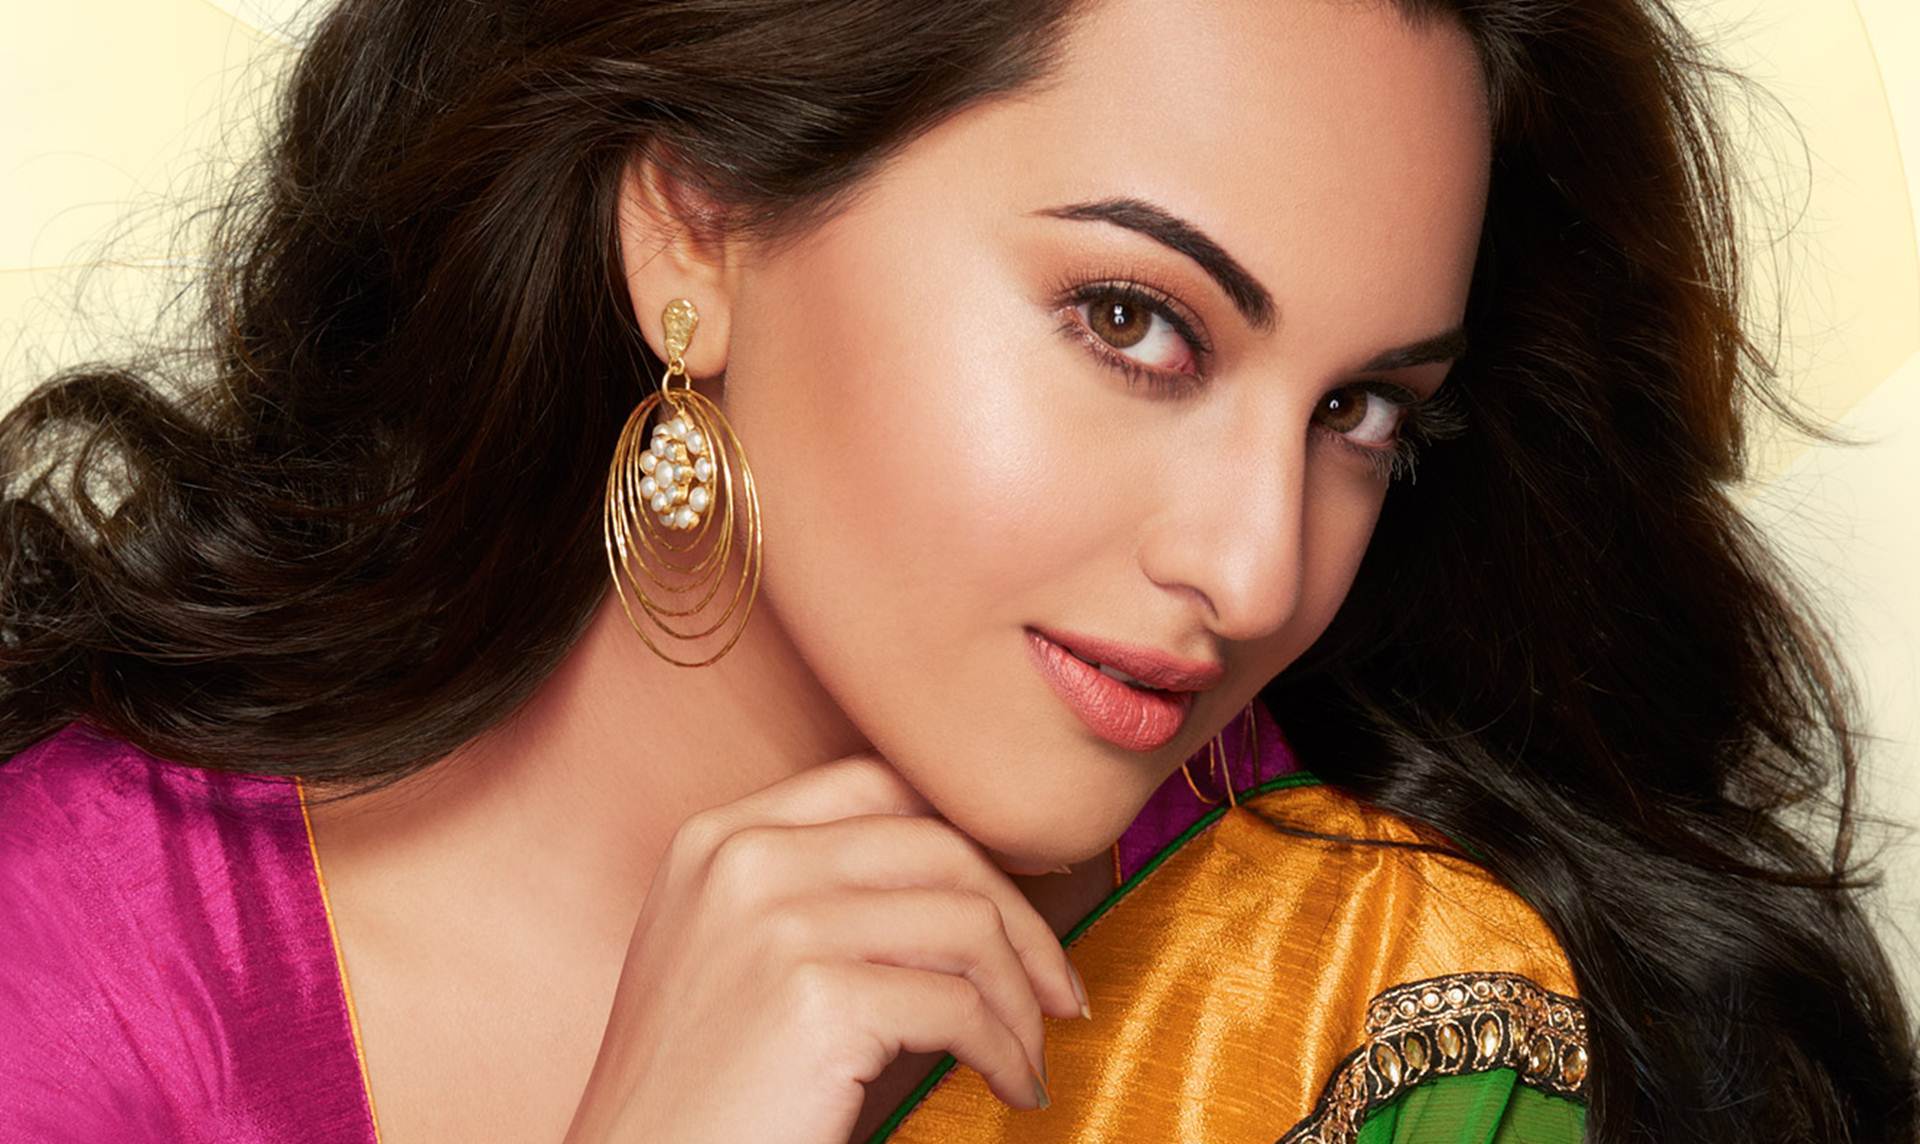 Sonakshi Sinha's facebook page gets over 10 million likes